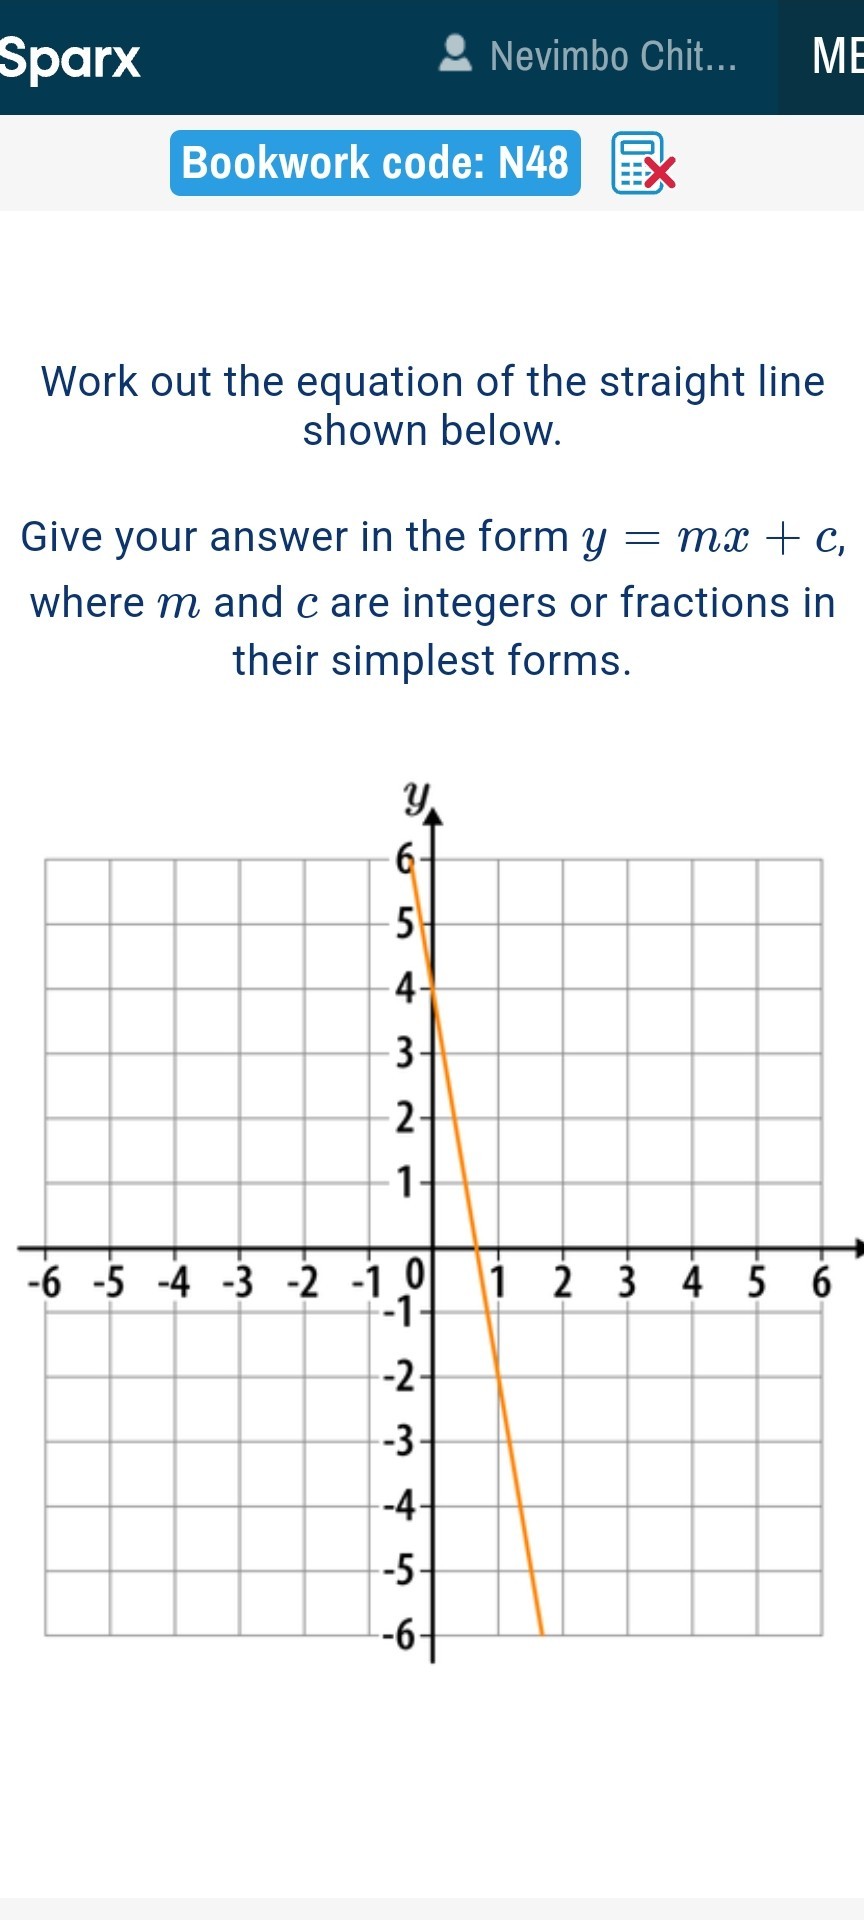 Bookwork code: N48
Work out the equation of the straight line shown below.

Give your answer in the form y=m x+c, where m and c are integers or fractions in their simplest forms.